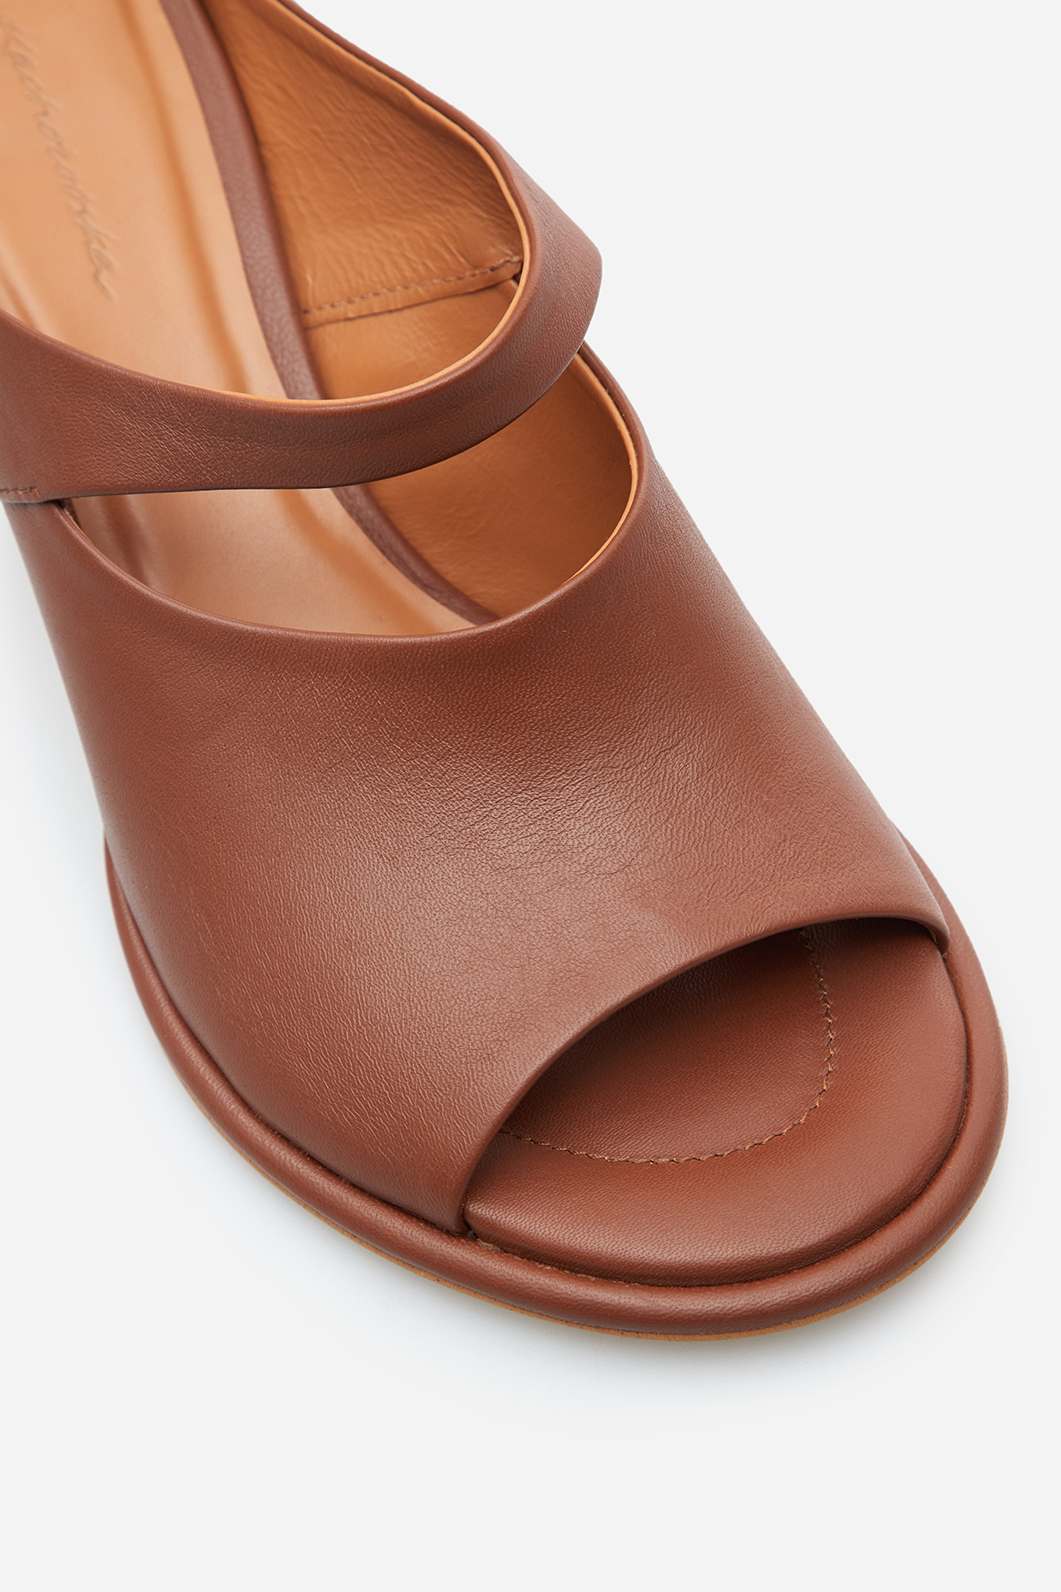 Tracy brown leather
sandals /5 cm/